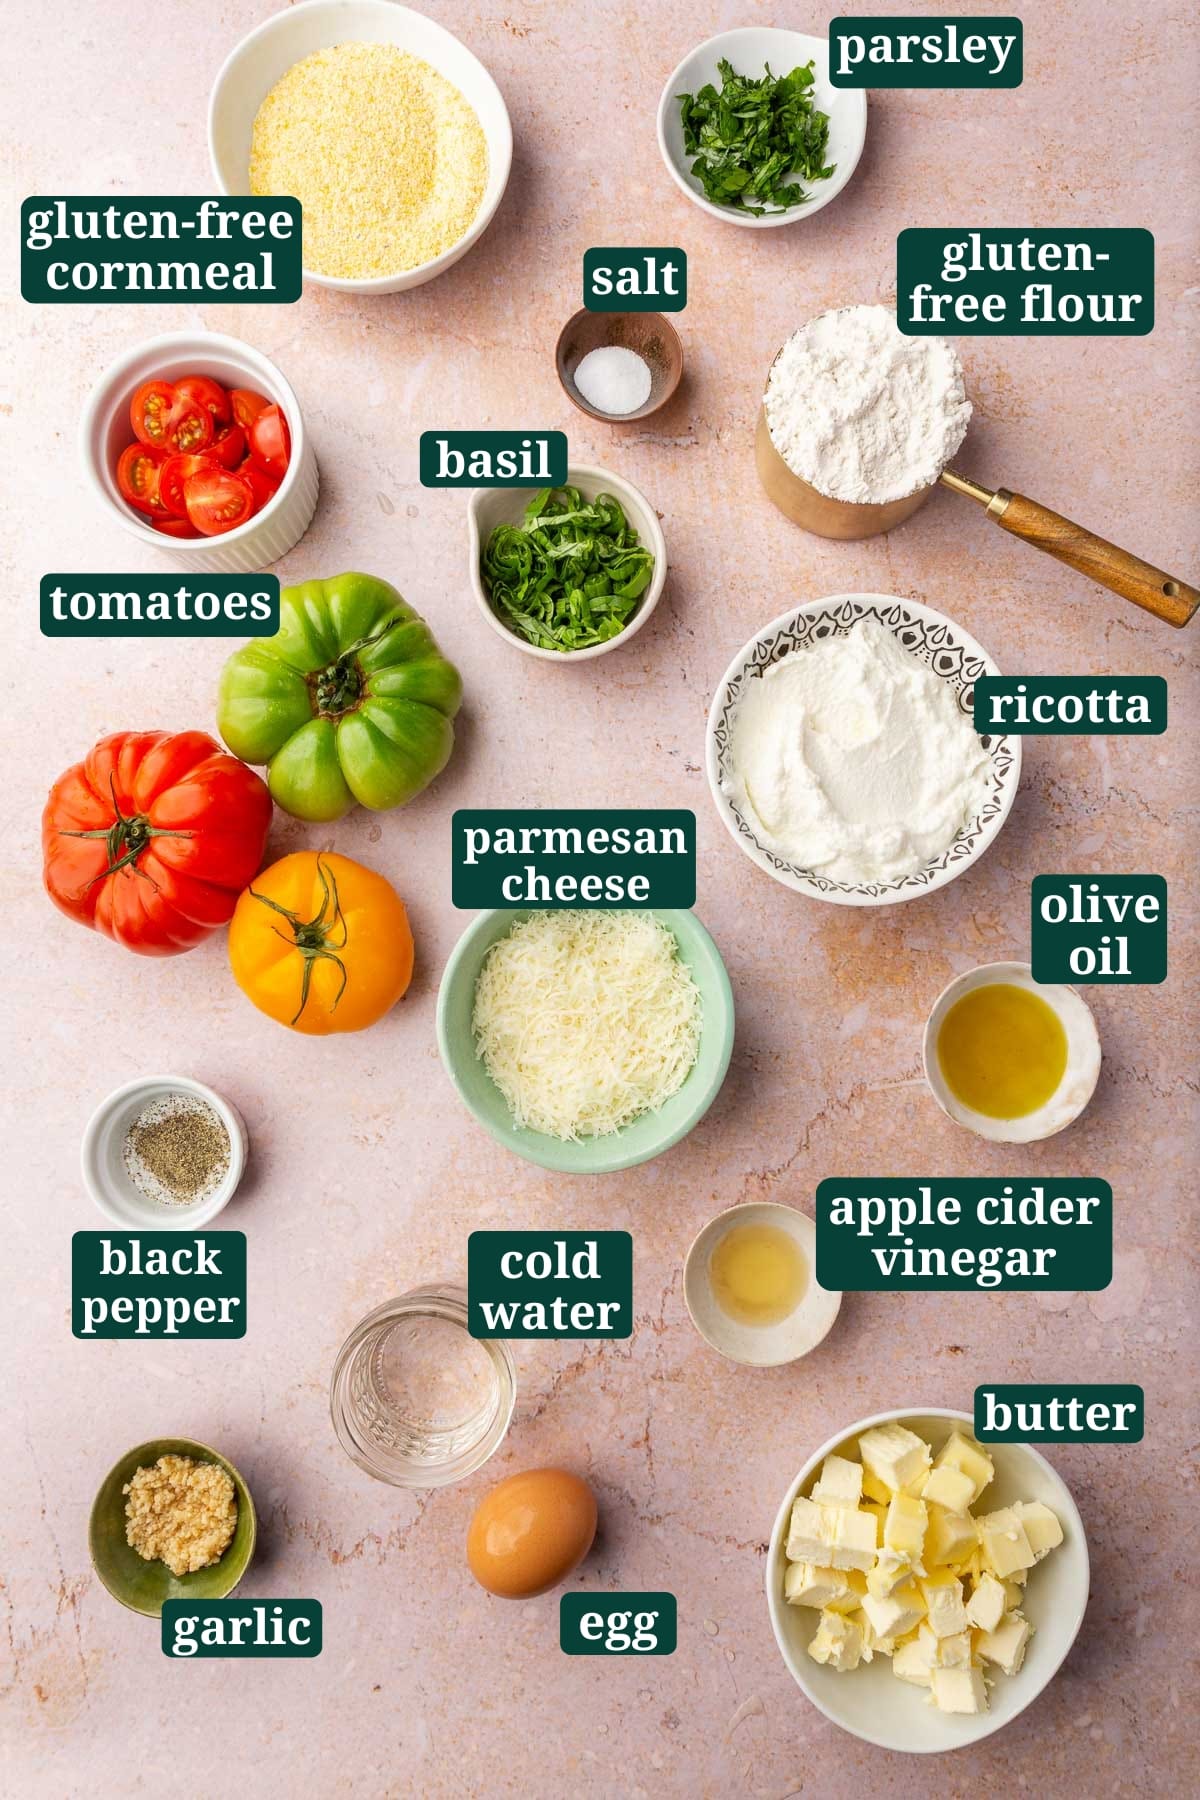 An overhead view of ingredients in small bowls to make a gluten-free tomato galette, including cornmeal, basil, salt, gluten-free flour, parsley, cherry tomatoes, heirloom tomatoes, ricotta cheese, parmesan cheese, pepper, water, olive oil, apple cider vinegar, egg, minced garlic and cold butter with text overlays over each ingredient.